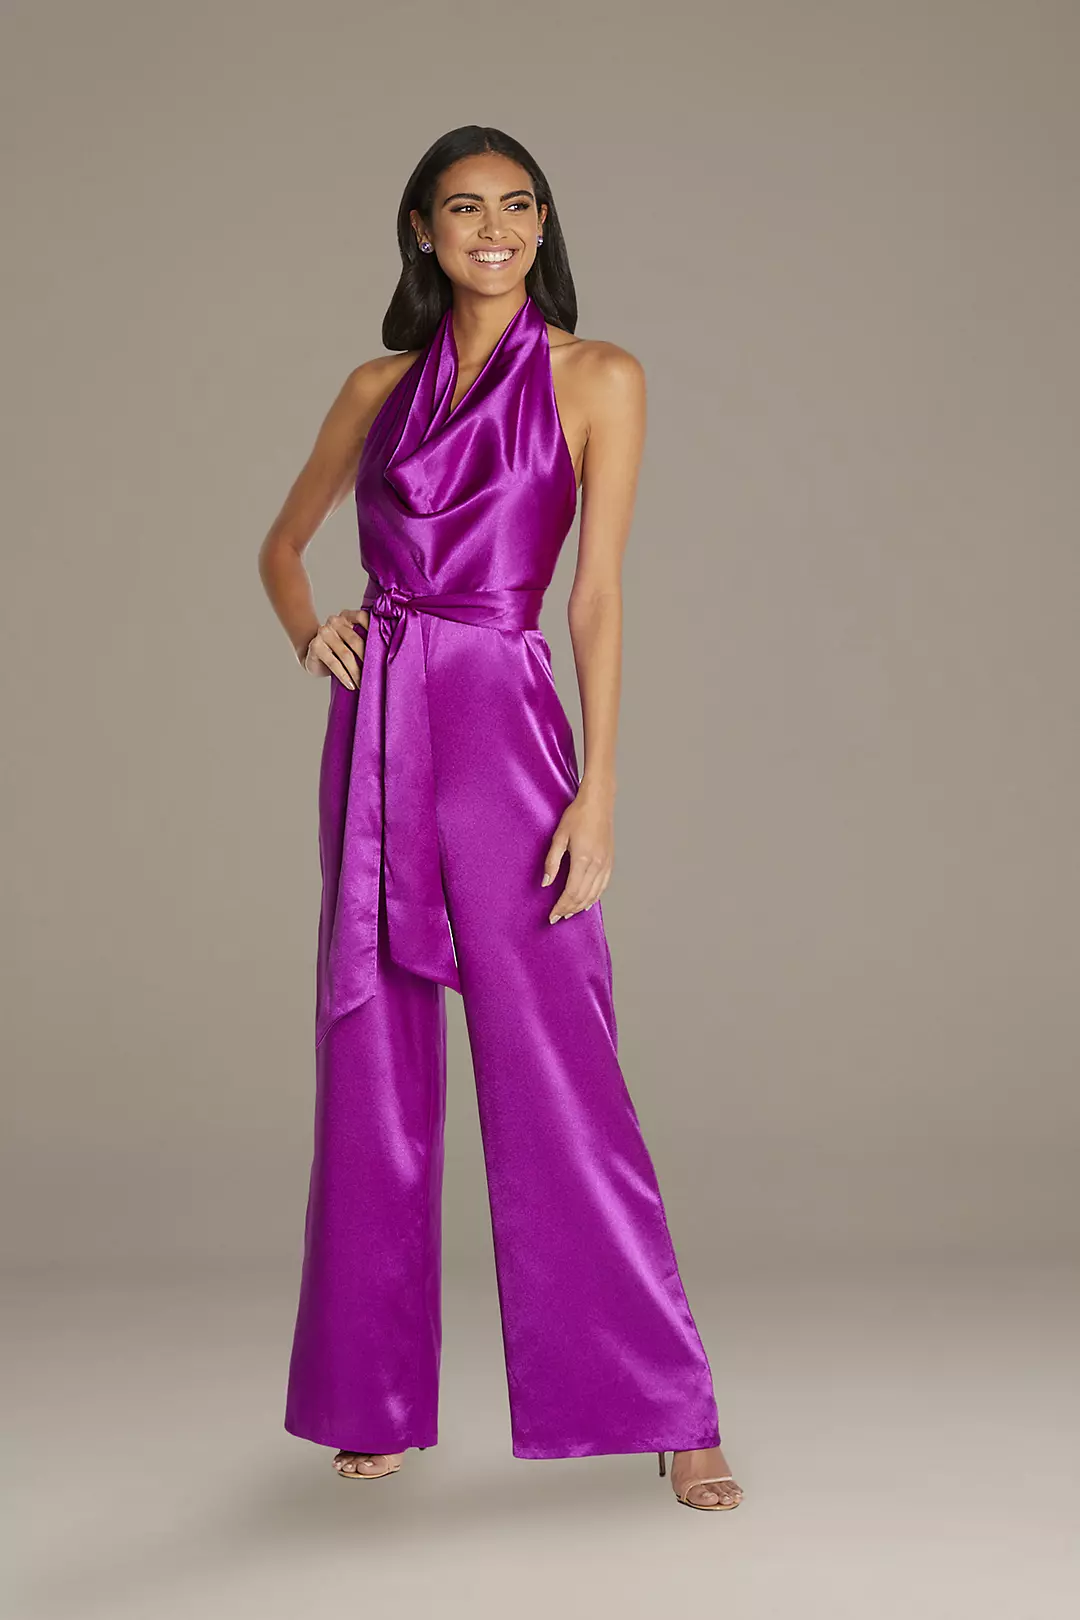 Cowl Neck Satin Halter Jumpsuit with Open Back Image 2